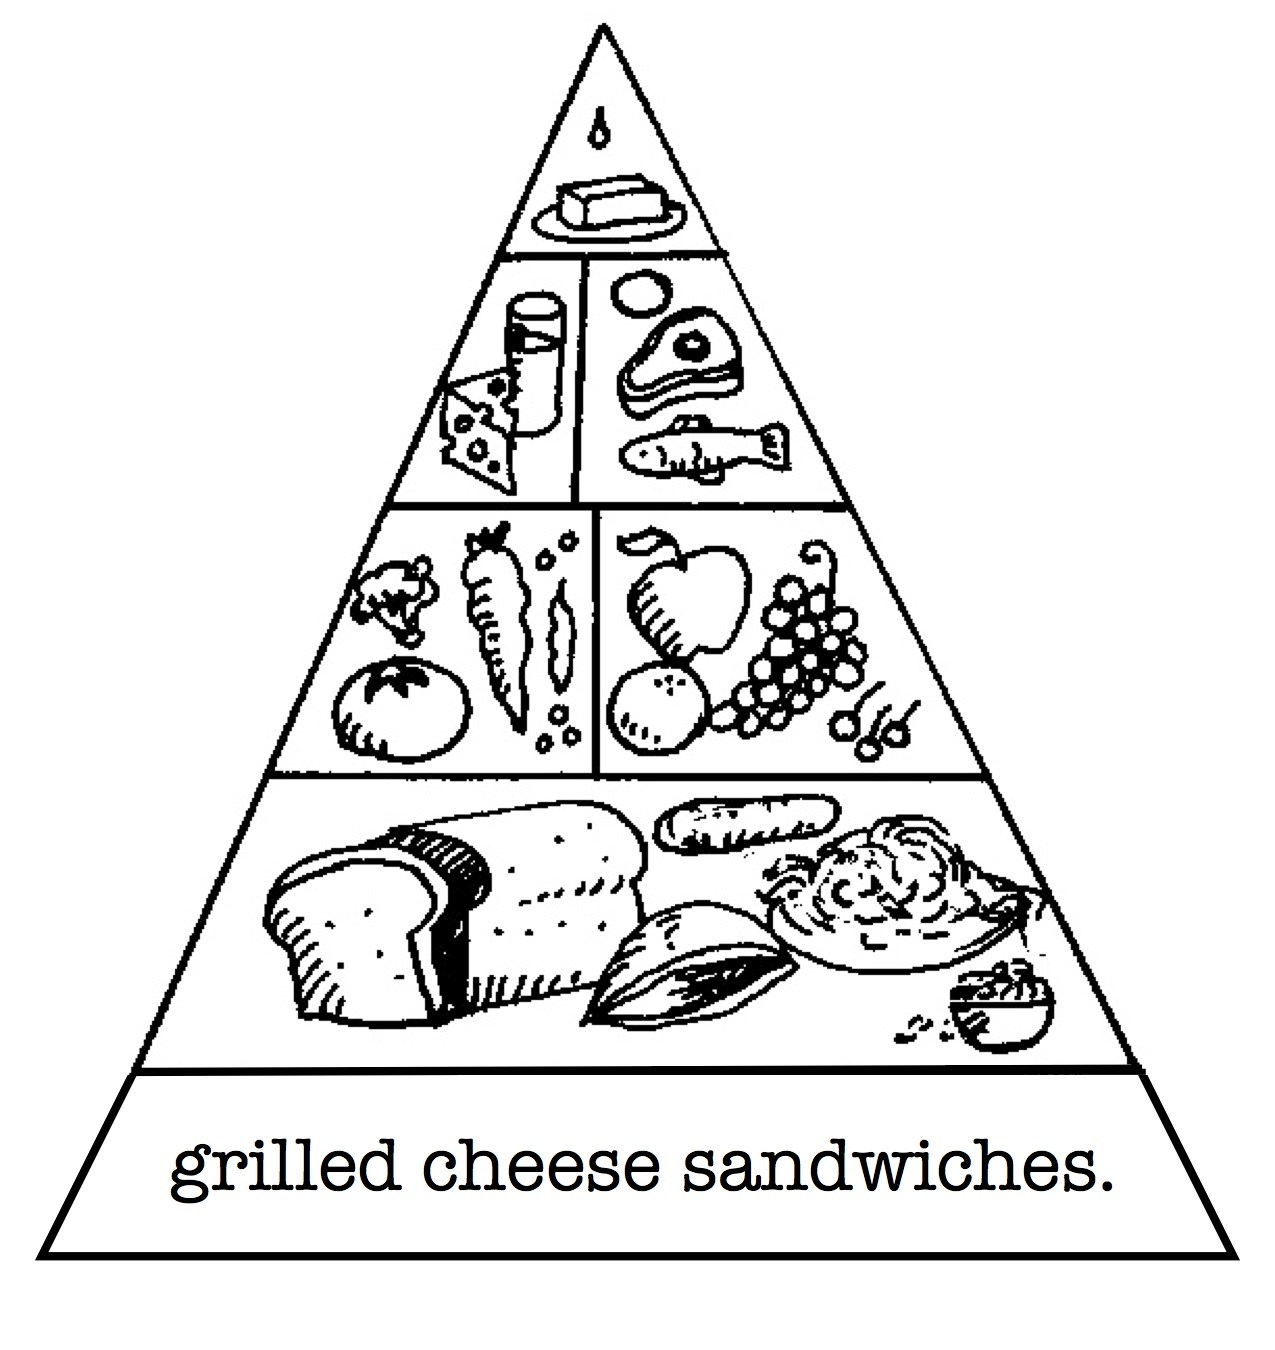 Food Pyramid Coloring Pages Free Coloring Pages Of Food Pyramid For Kids Colouring